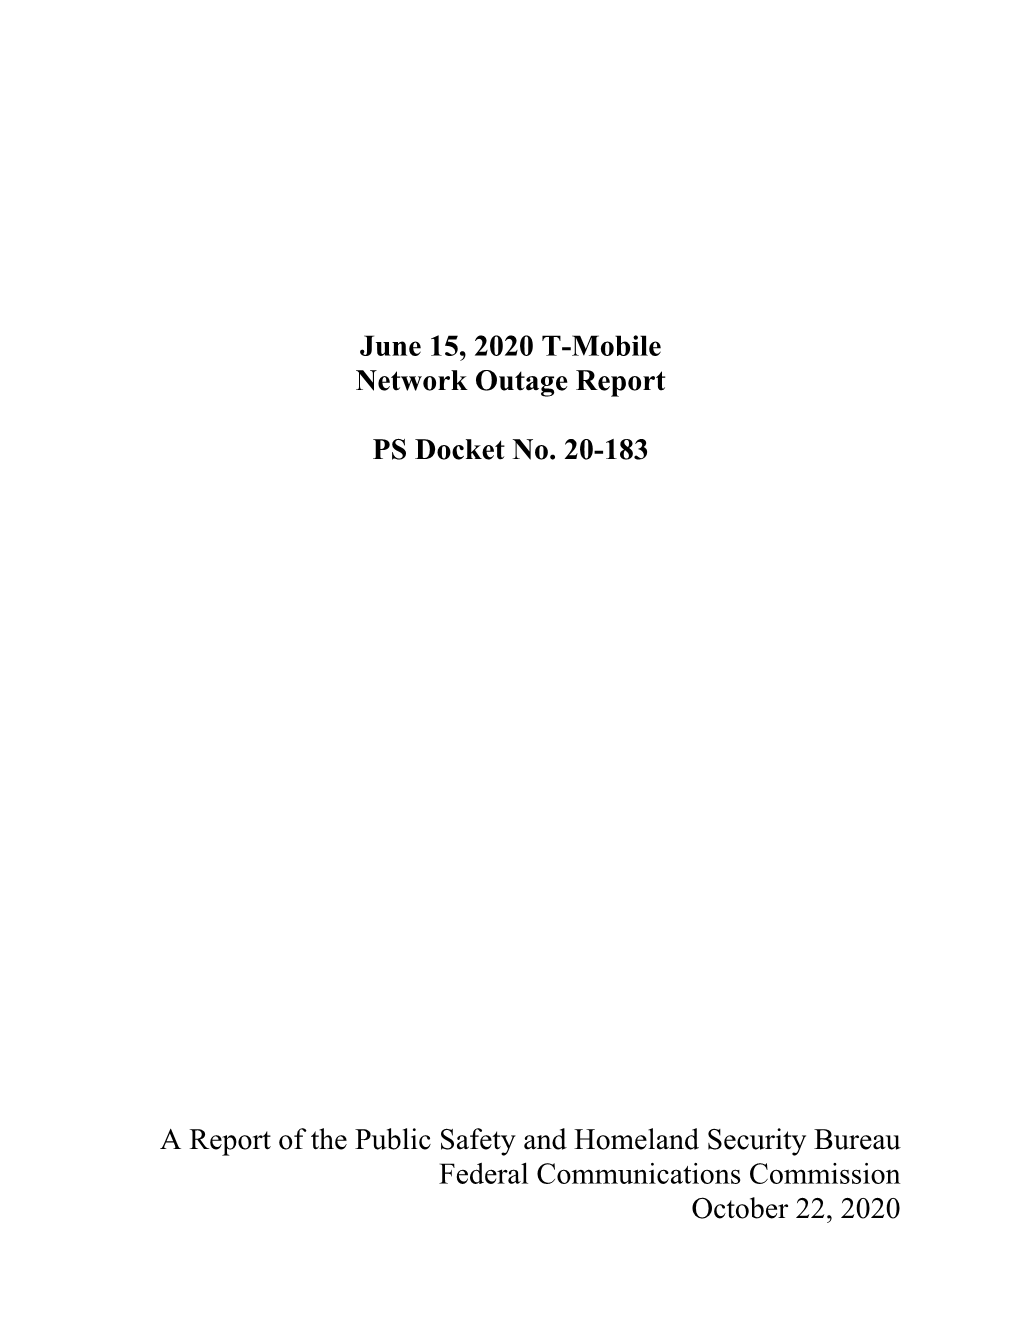 June 15, 2020 T-Mobile Network Outage Report PS Docket